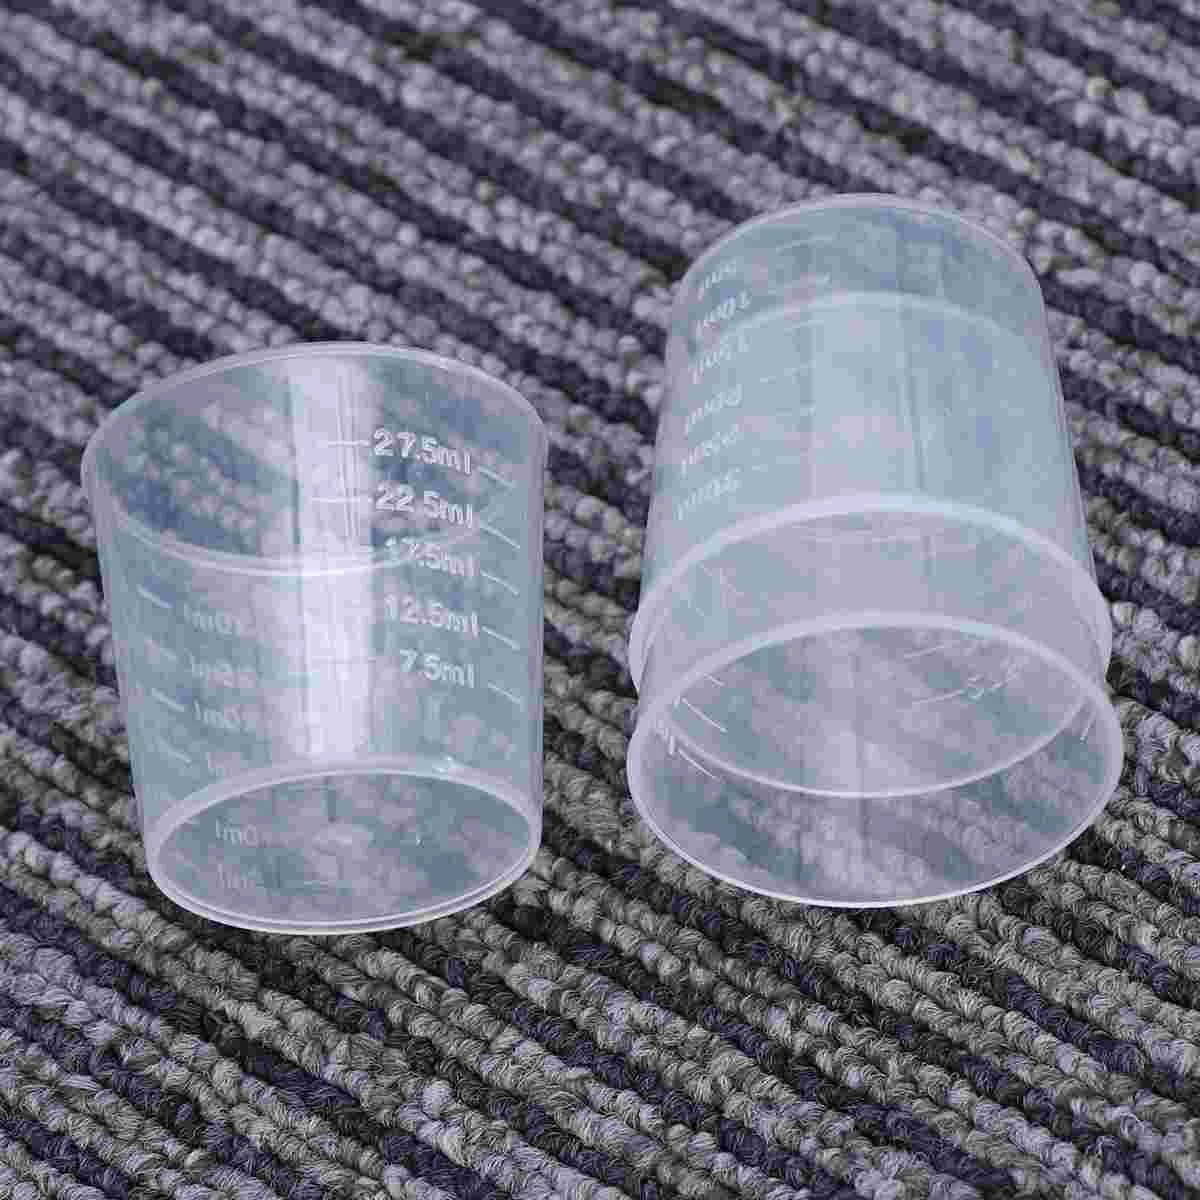 

50pcs 30ml Plastic Graduated Cups Measuring Scale Cups Transparent Liquid Container for Mixing Paint Stain Epoxy Scales kitchen